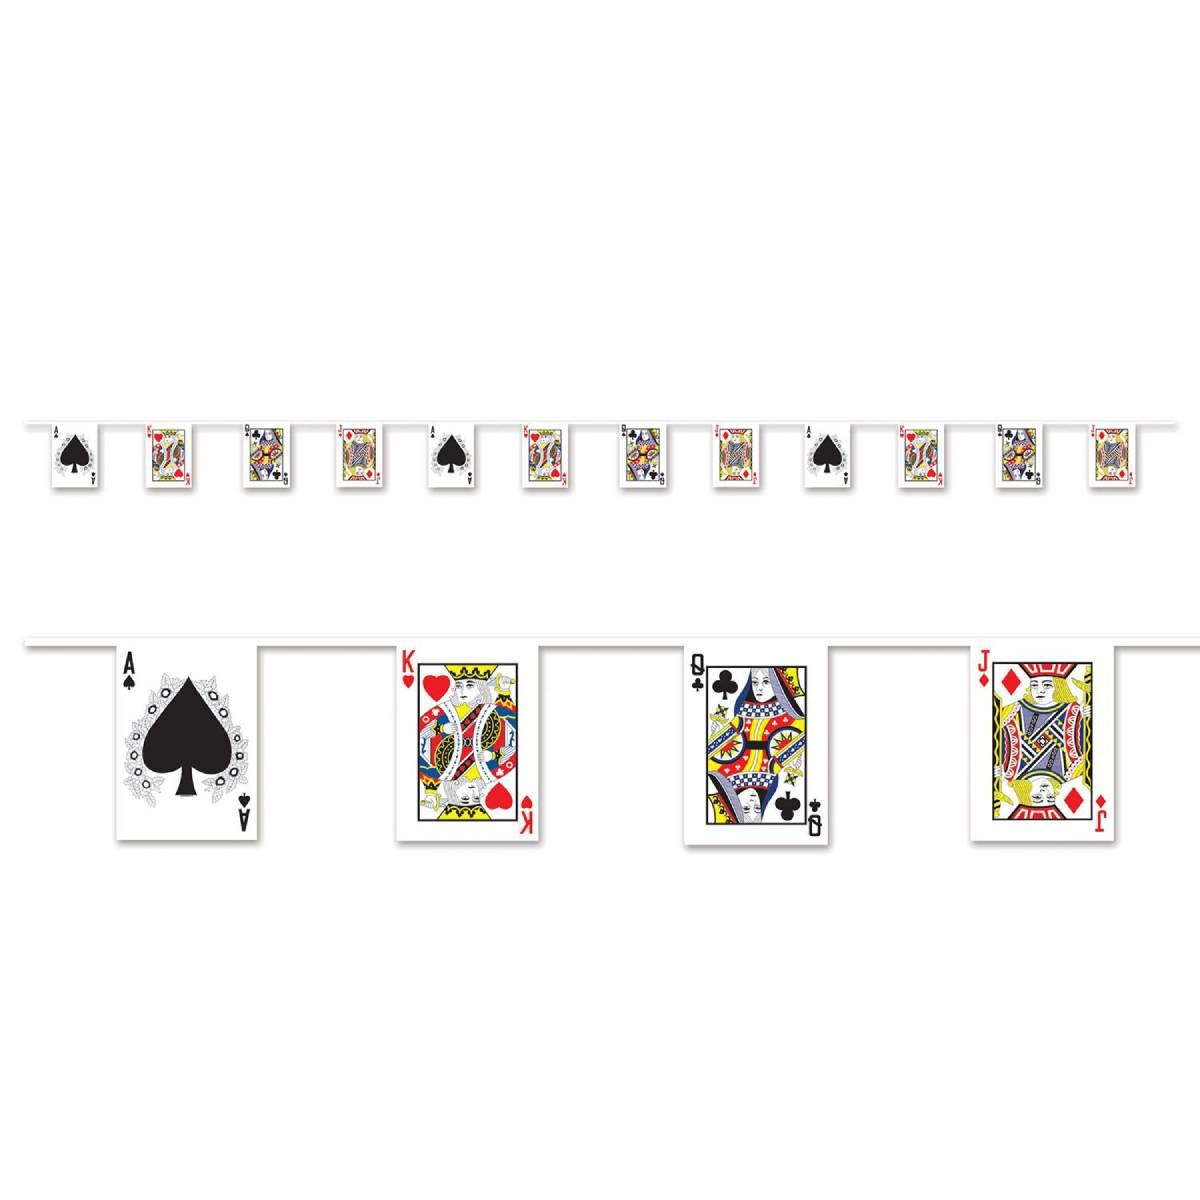 Playing Card Pennant Banner by Beistle 54167 available here at Karnival Costumes online party shop